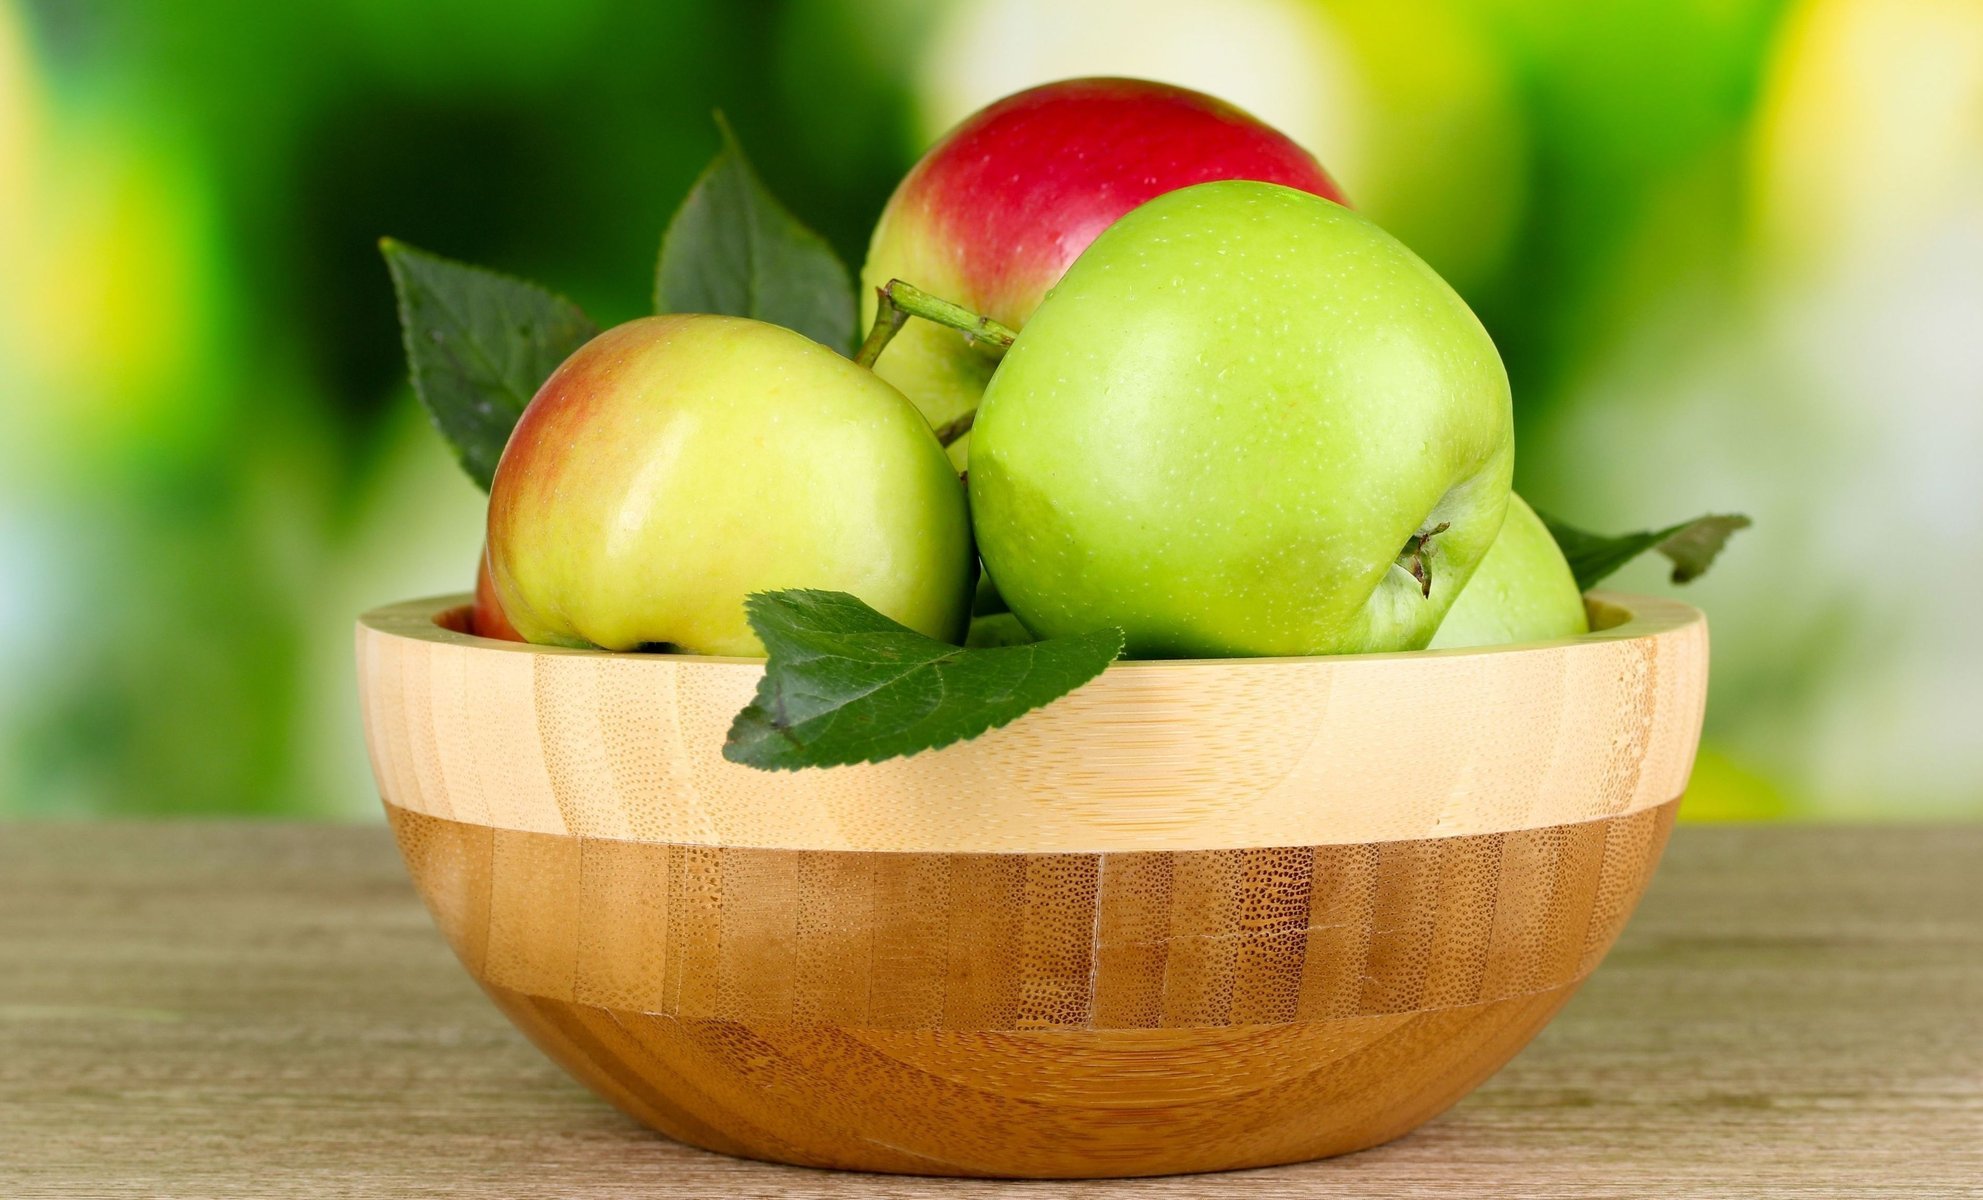 Green apples on a wooden table